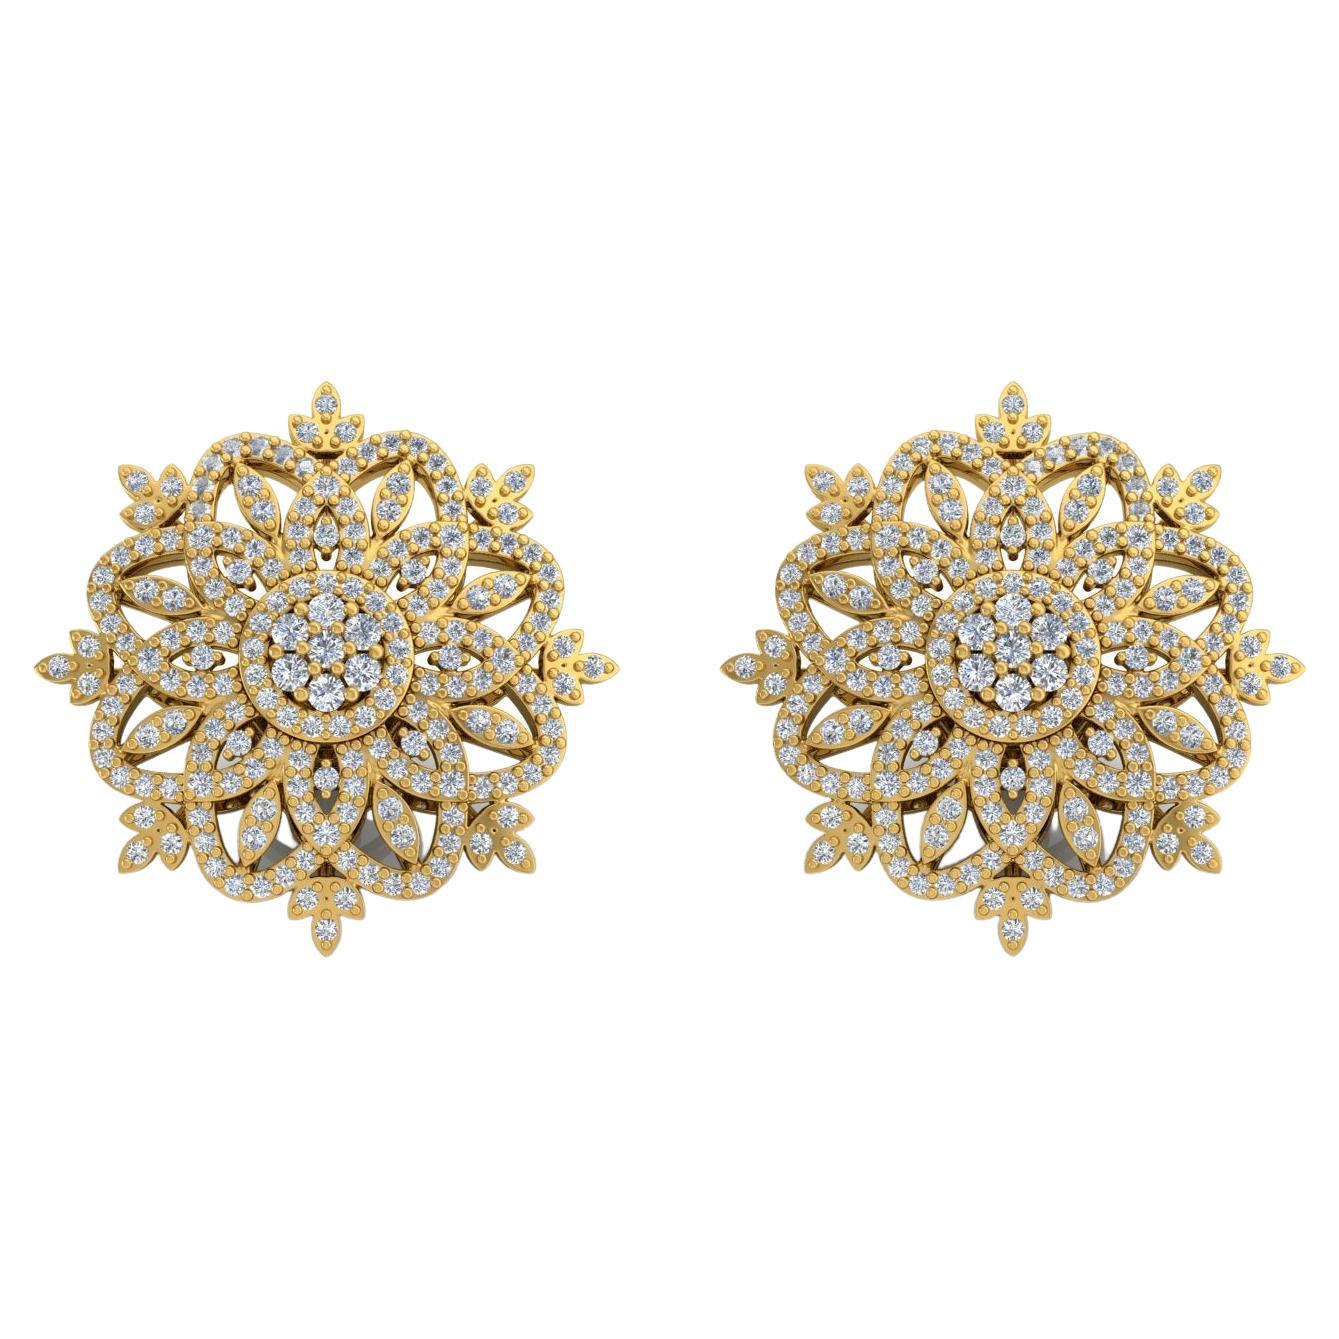 Real SI Clarity HI Color Pave Diamond Flower Stud Earrings 18 Karat Yellow Gold